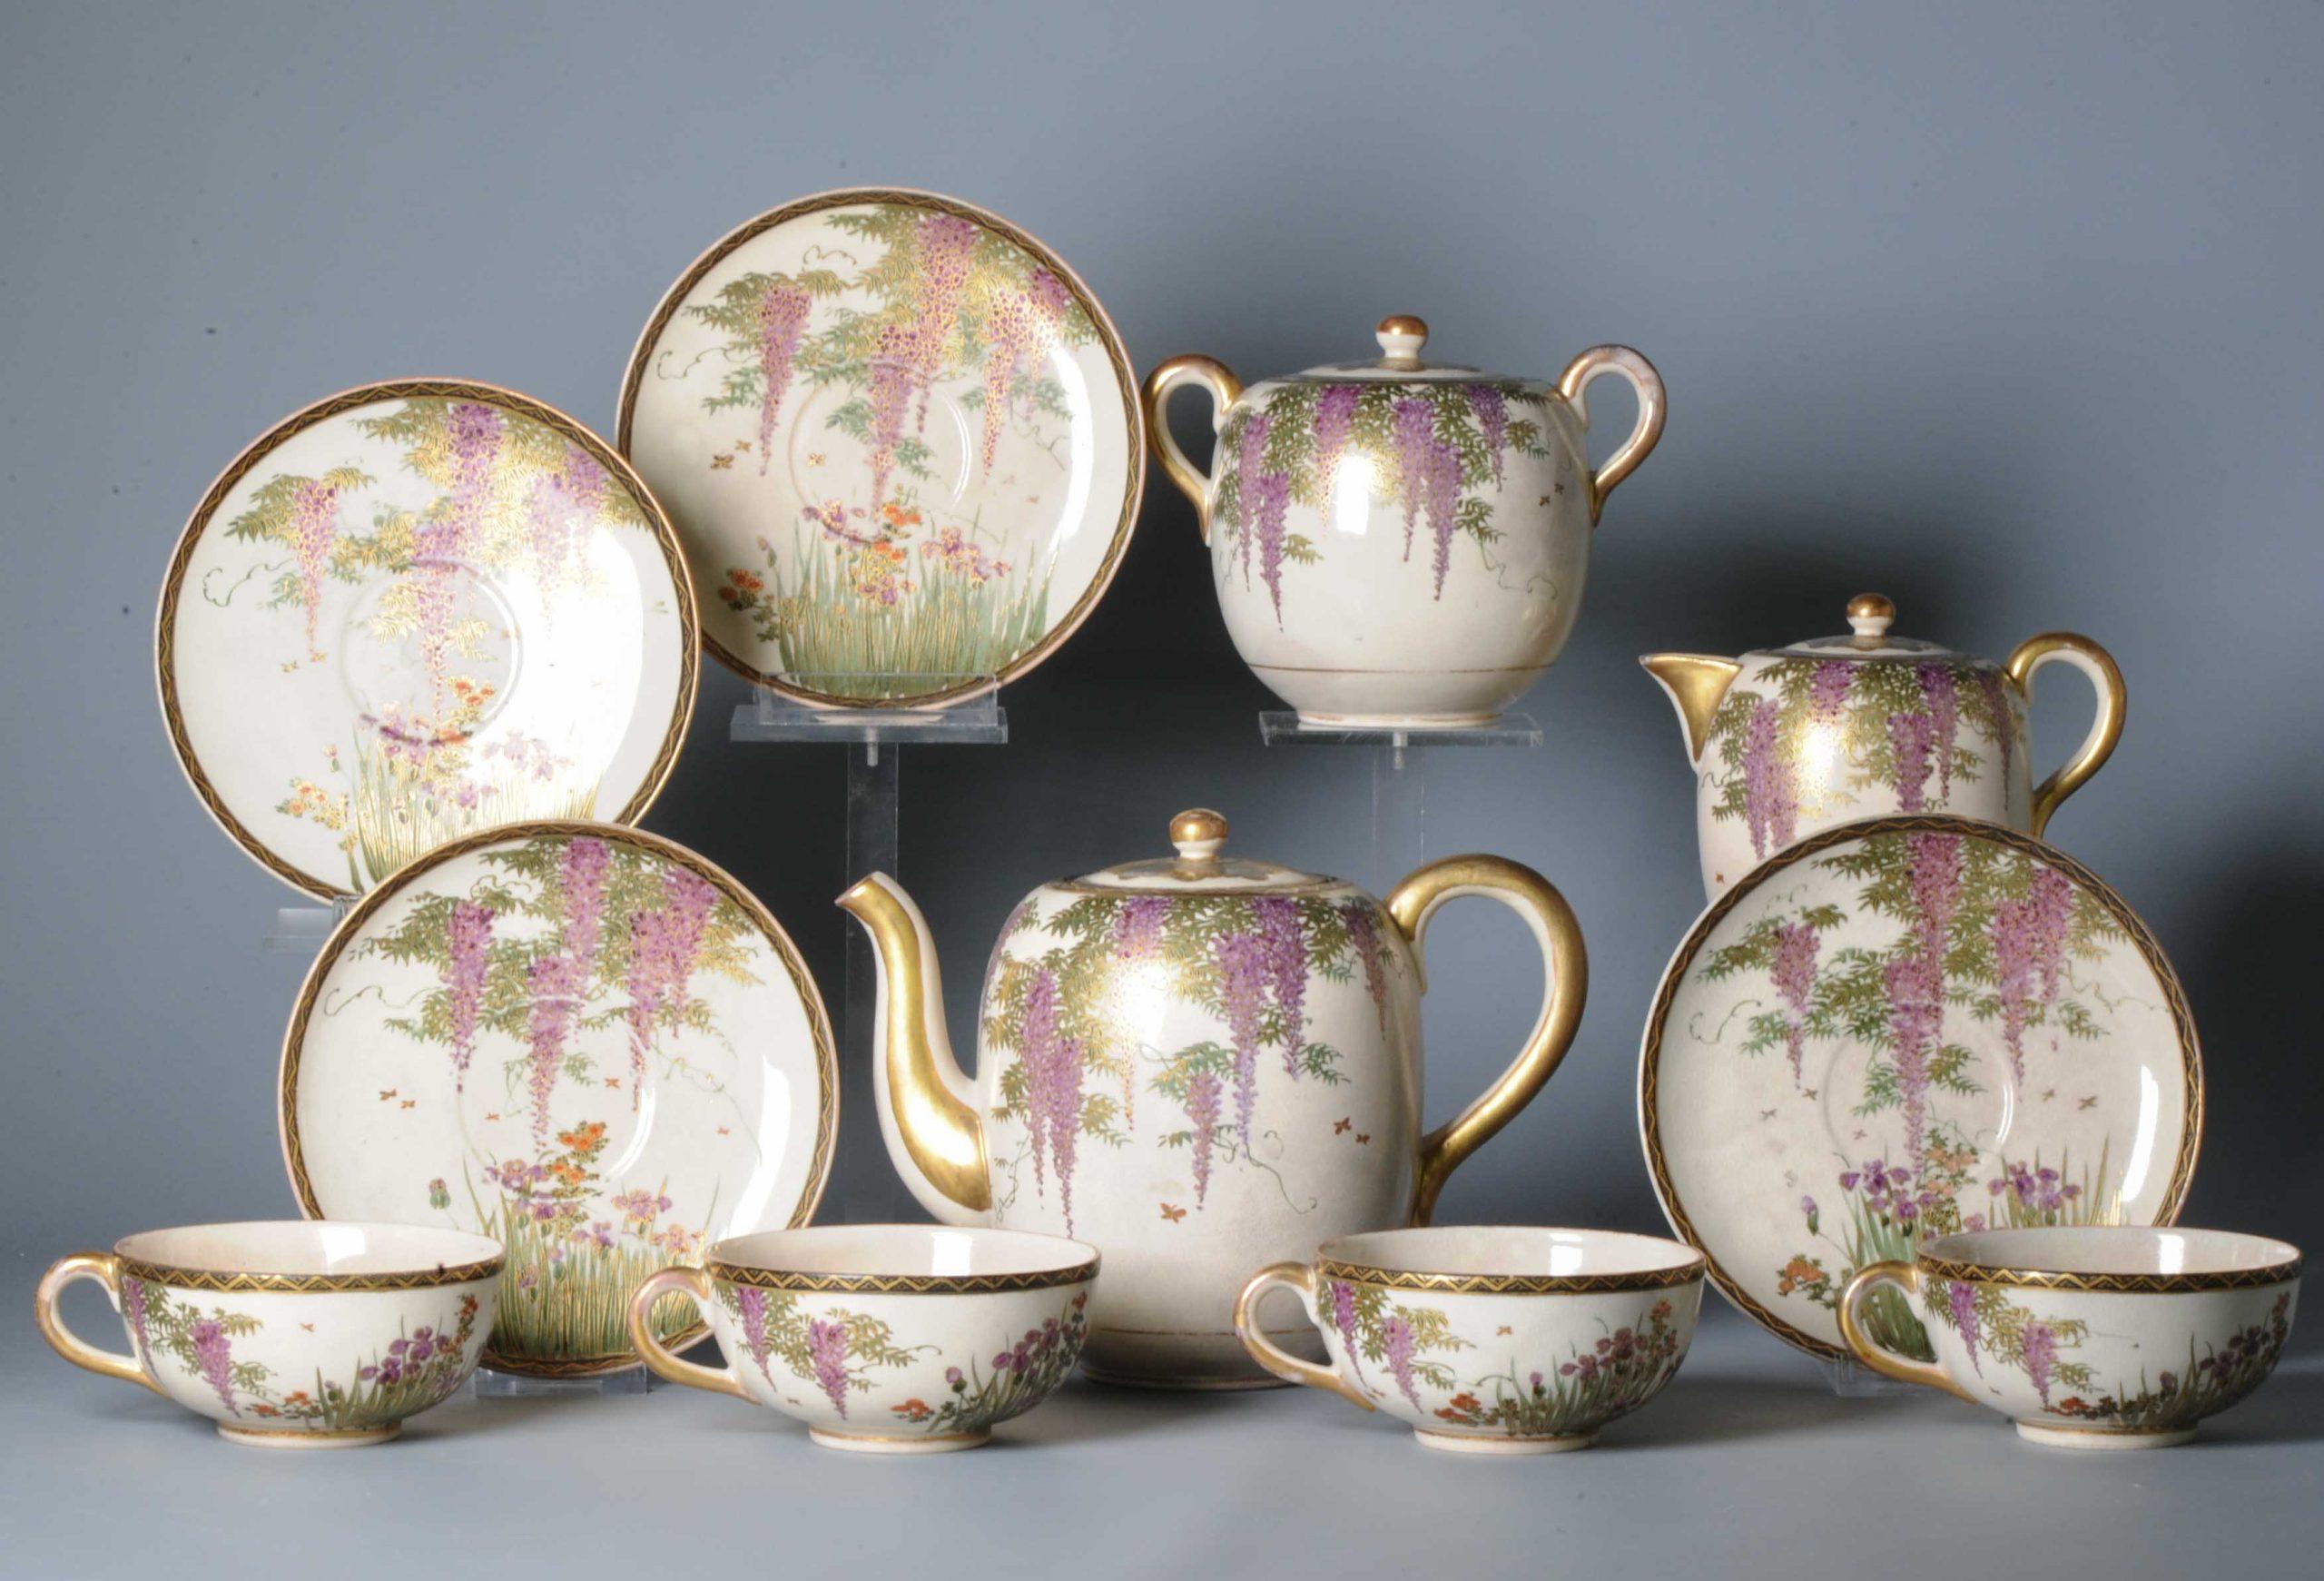 Fabulous Tea set Satsuma of 11 pieces. Meiji period, 19th century
Marked:
Condition
1 cup with small frits/fleebites rim, rest perfect. Size jugs 110-140mm high cups 90x45mm DXH and dishes 135x20mm DXH
Period
19th century Meiji Periode